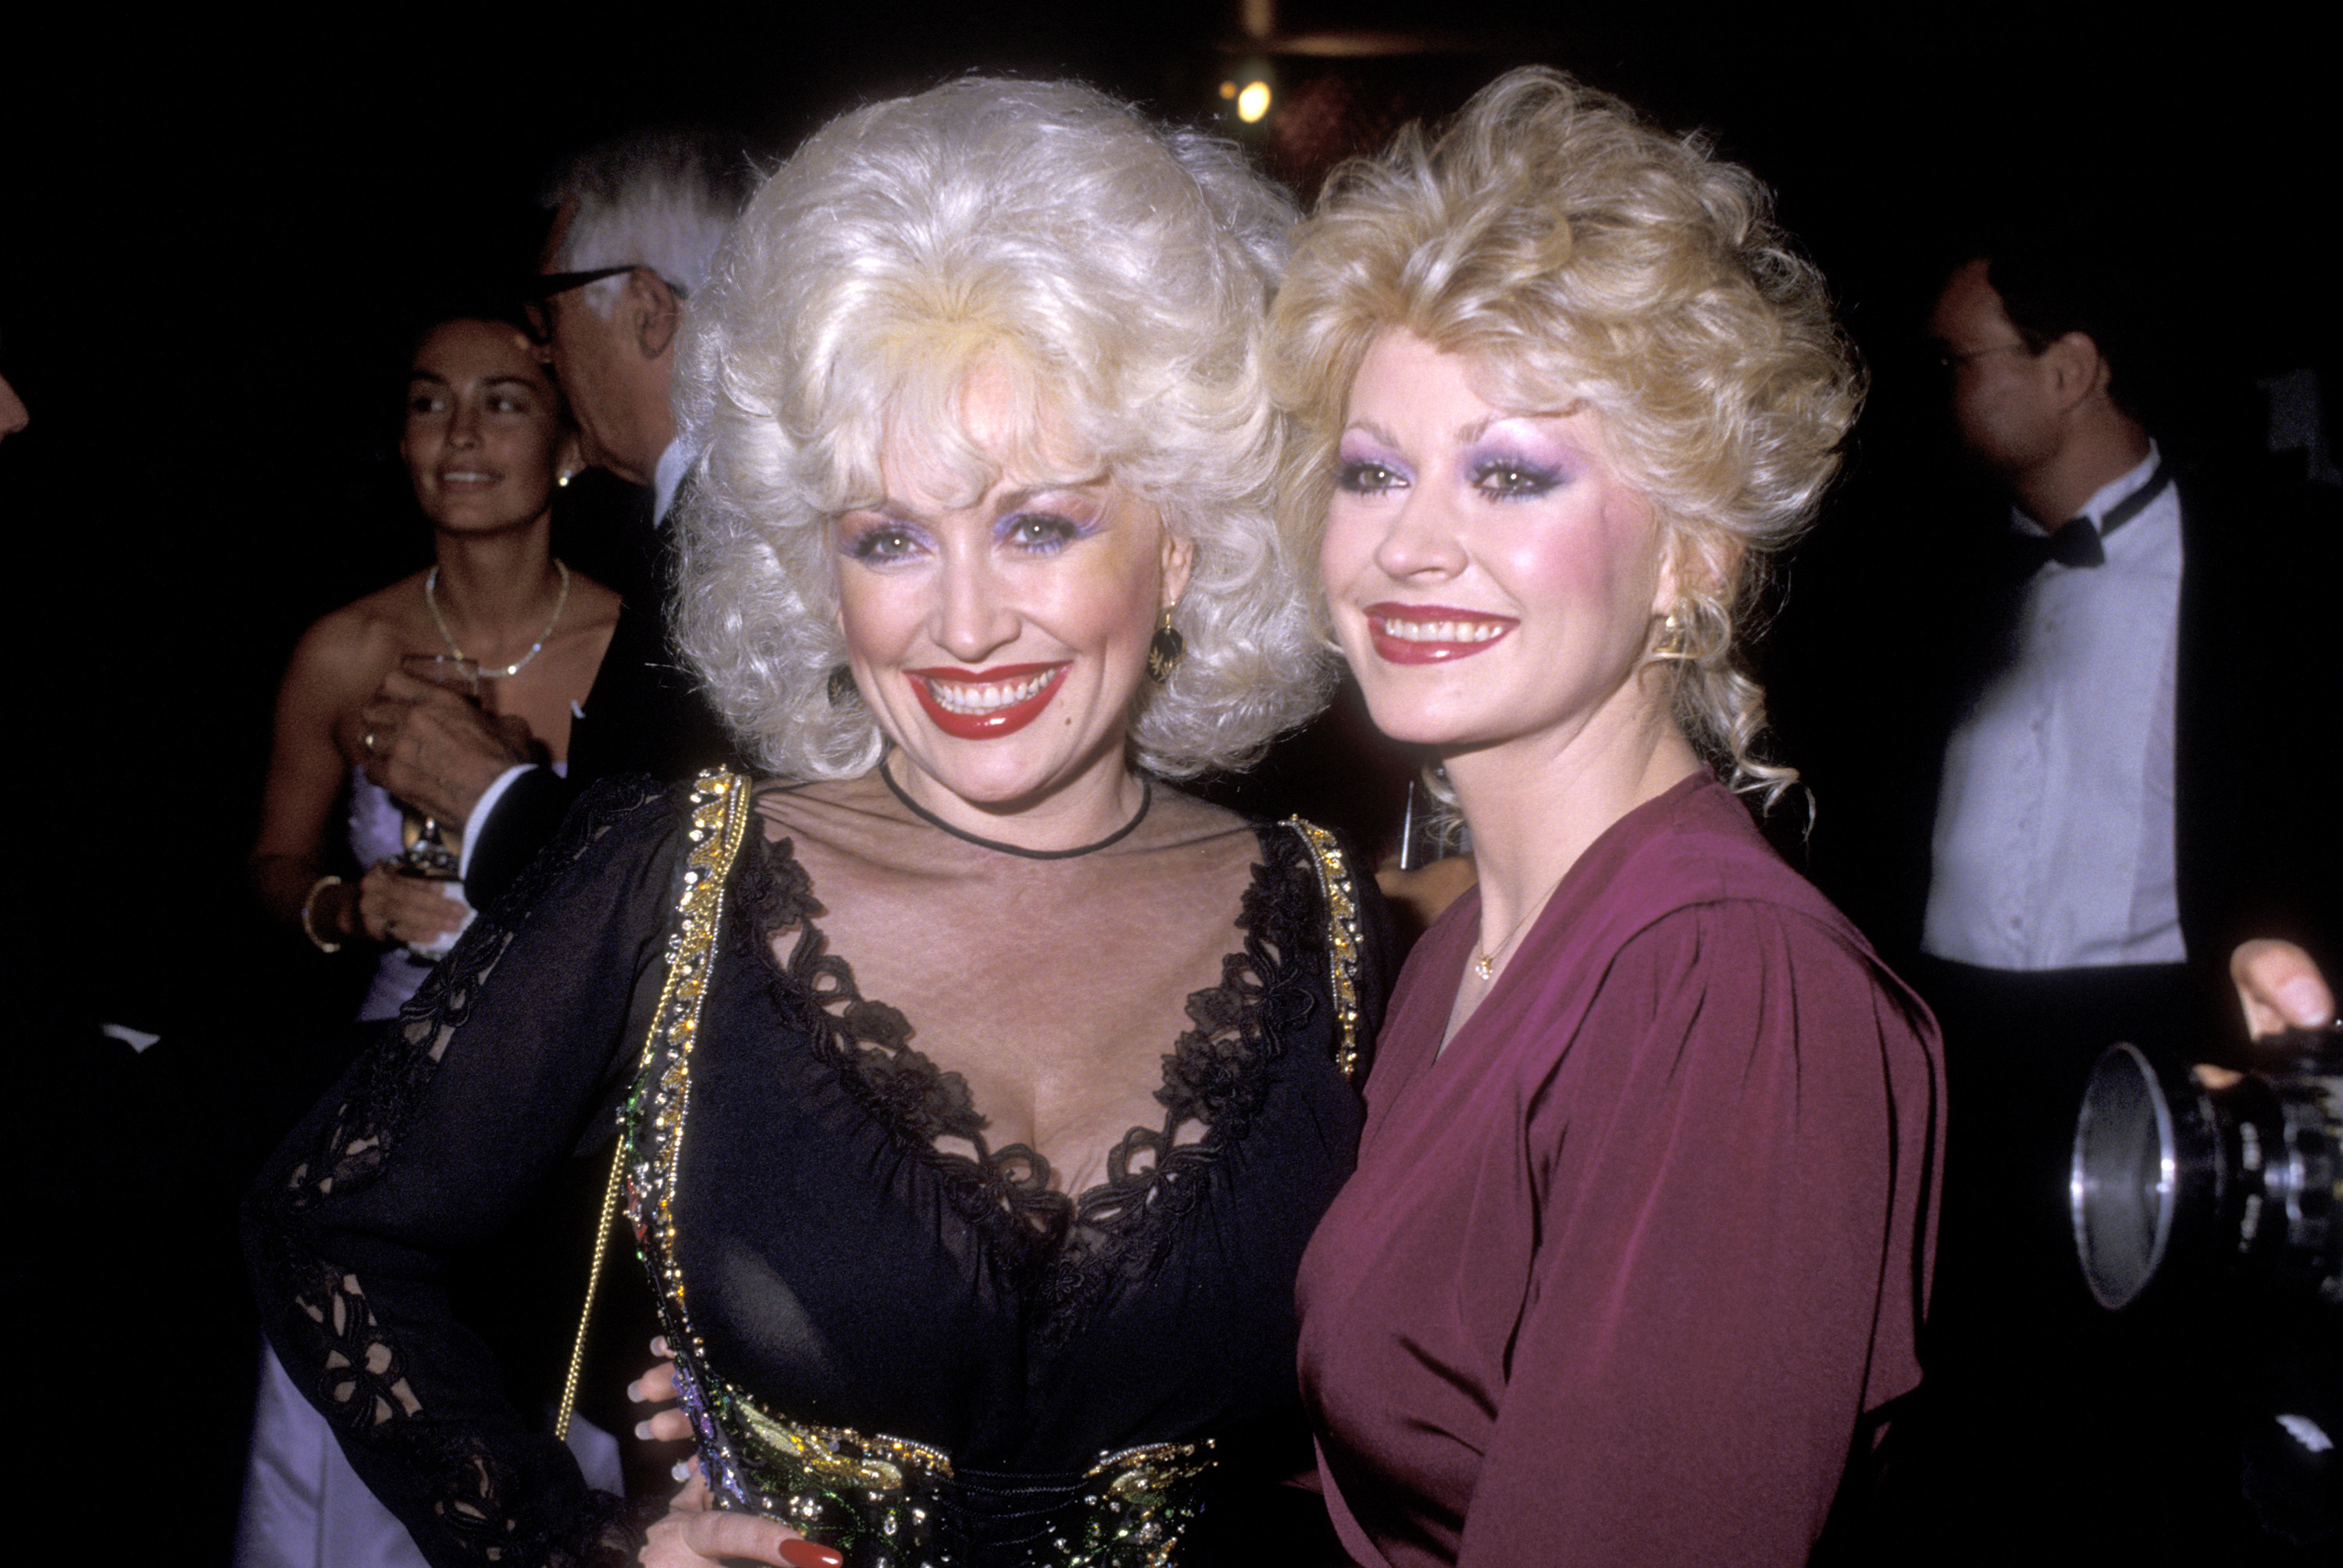 Musician Dolly Parton and sister Actress Rachel Dennison attend the 1983 Carousel of Hope Ball to Benefit the Barbara Davis Center for Childhood Diabetes on October 8, 1983, at Currigan Hall in Denver, Colorado. | Source: Getty Images